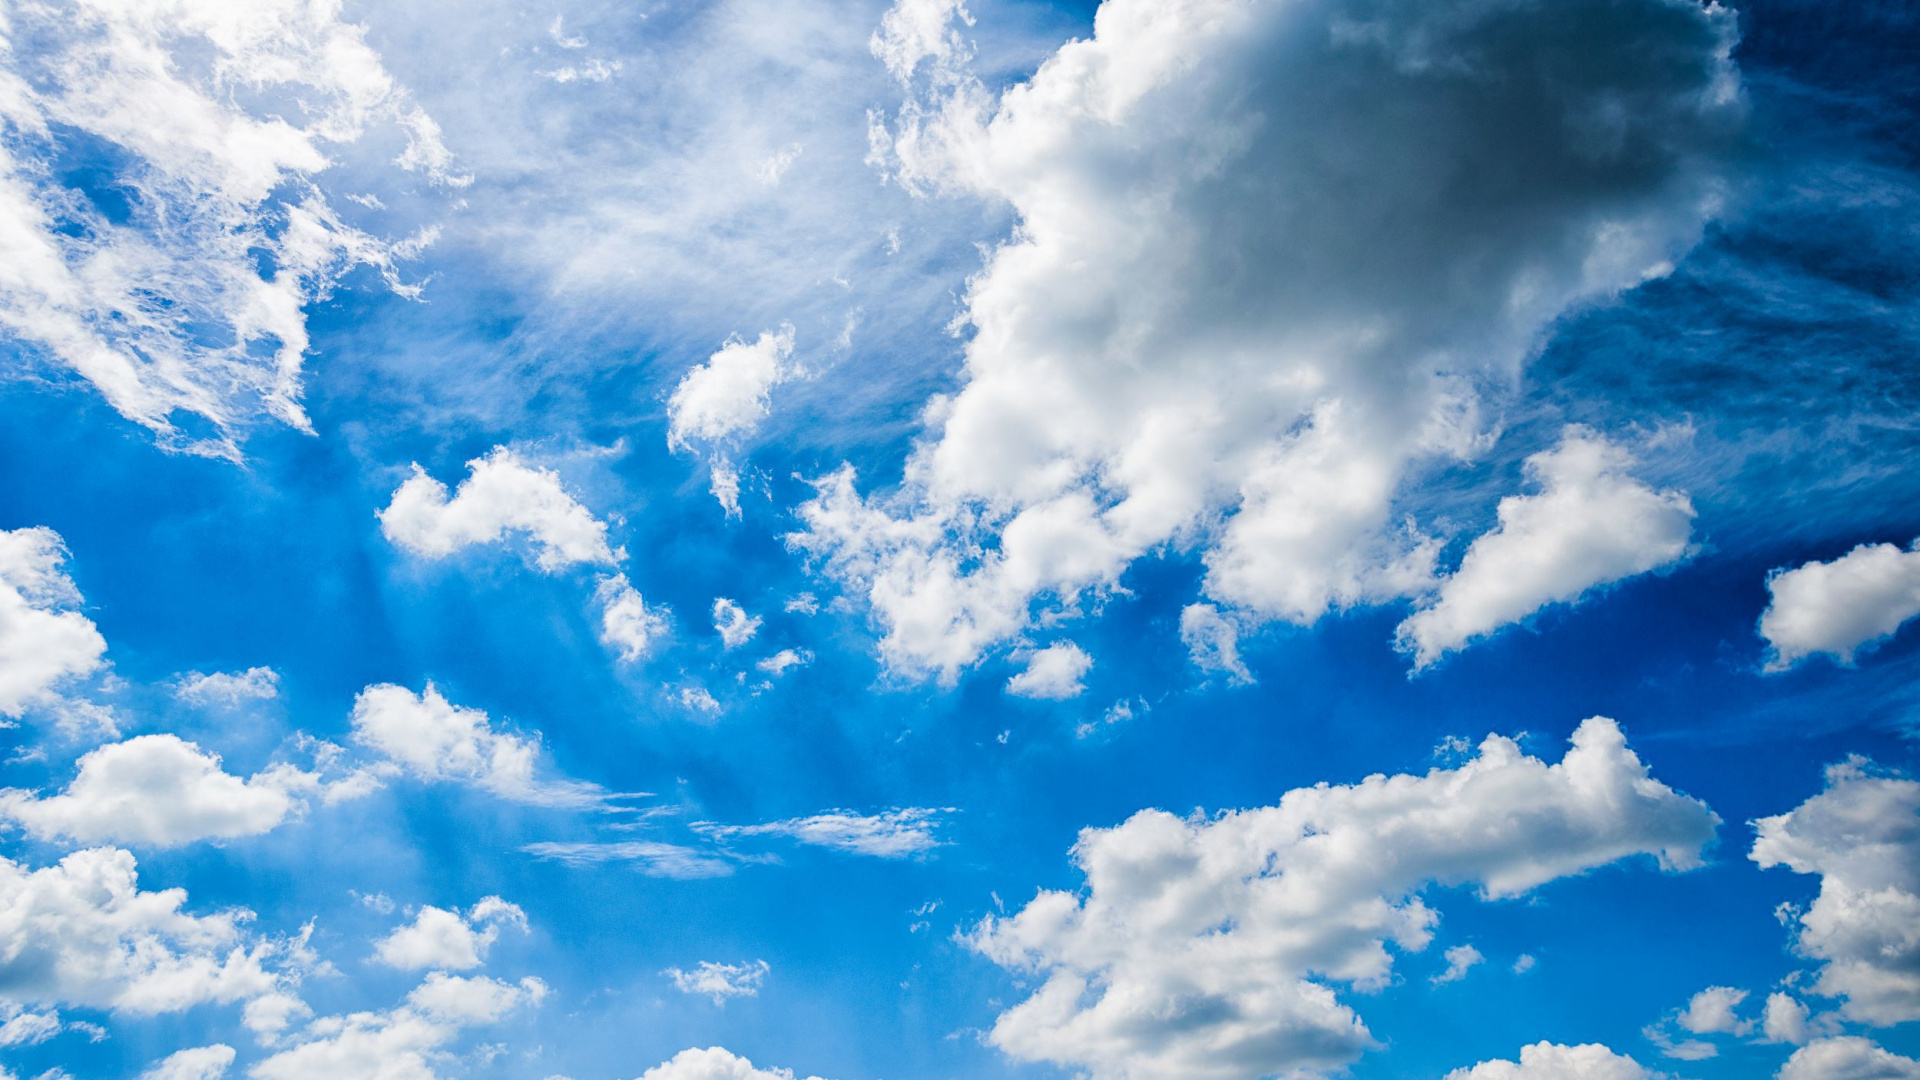 White Clouds and Blue Sky During Daytime. Wallpaper in 1920x1080 Resolution